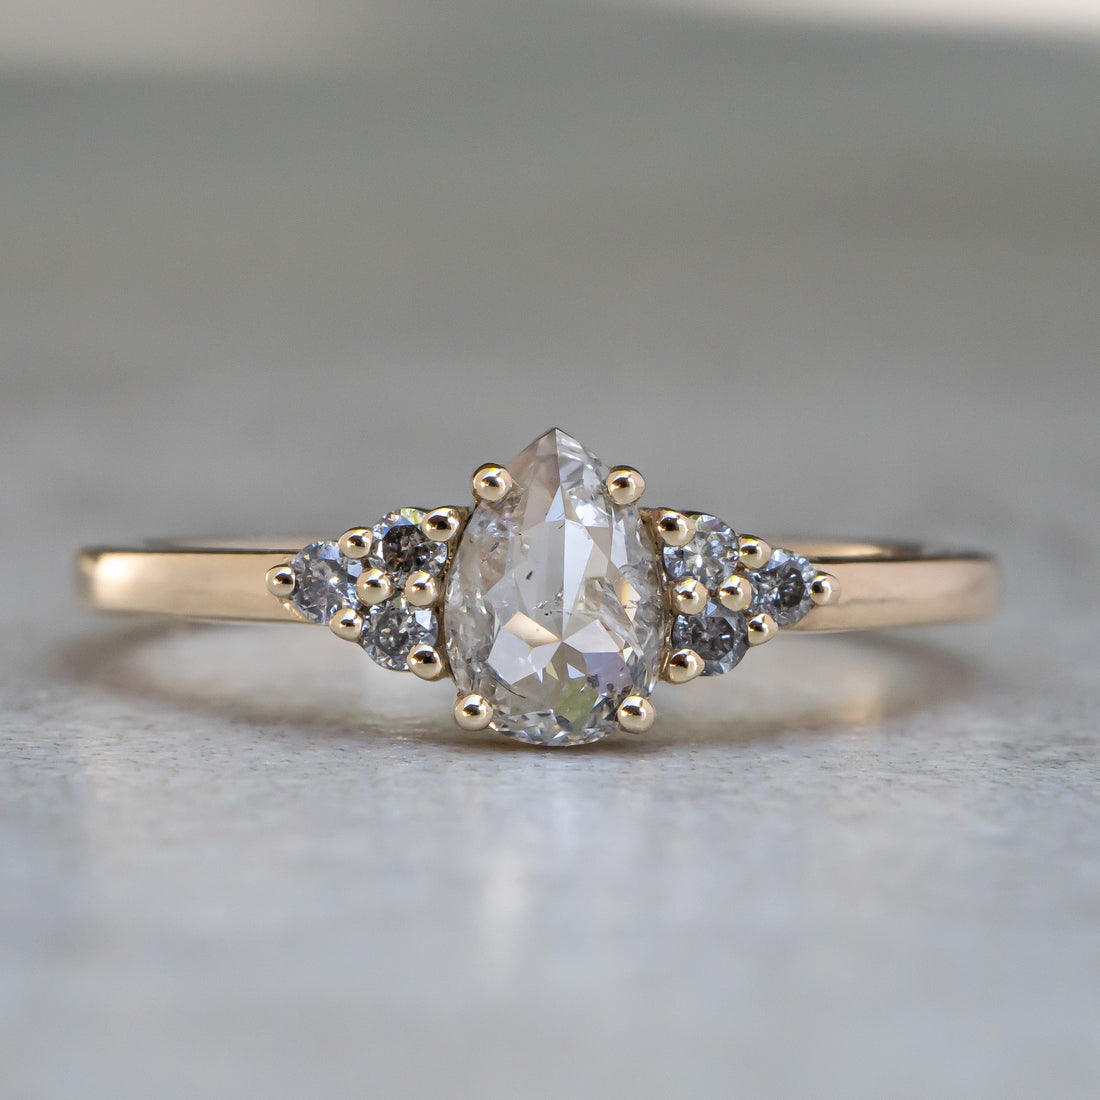 Icy White Pear Diamond Ring with Cluster Accents - Salt and Pepper Diamond Ring- mossNstone